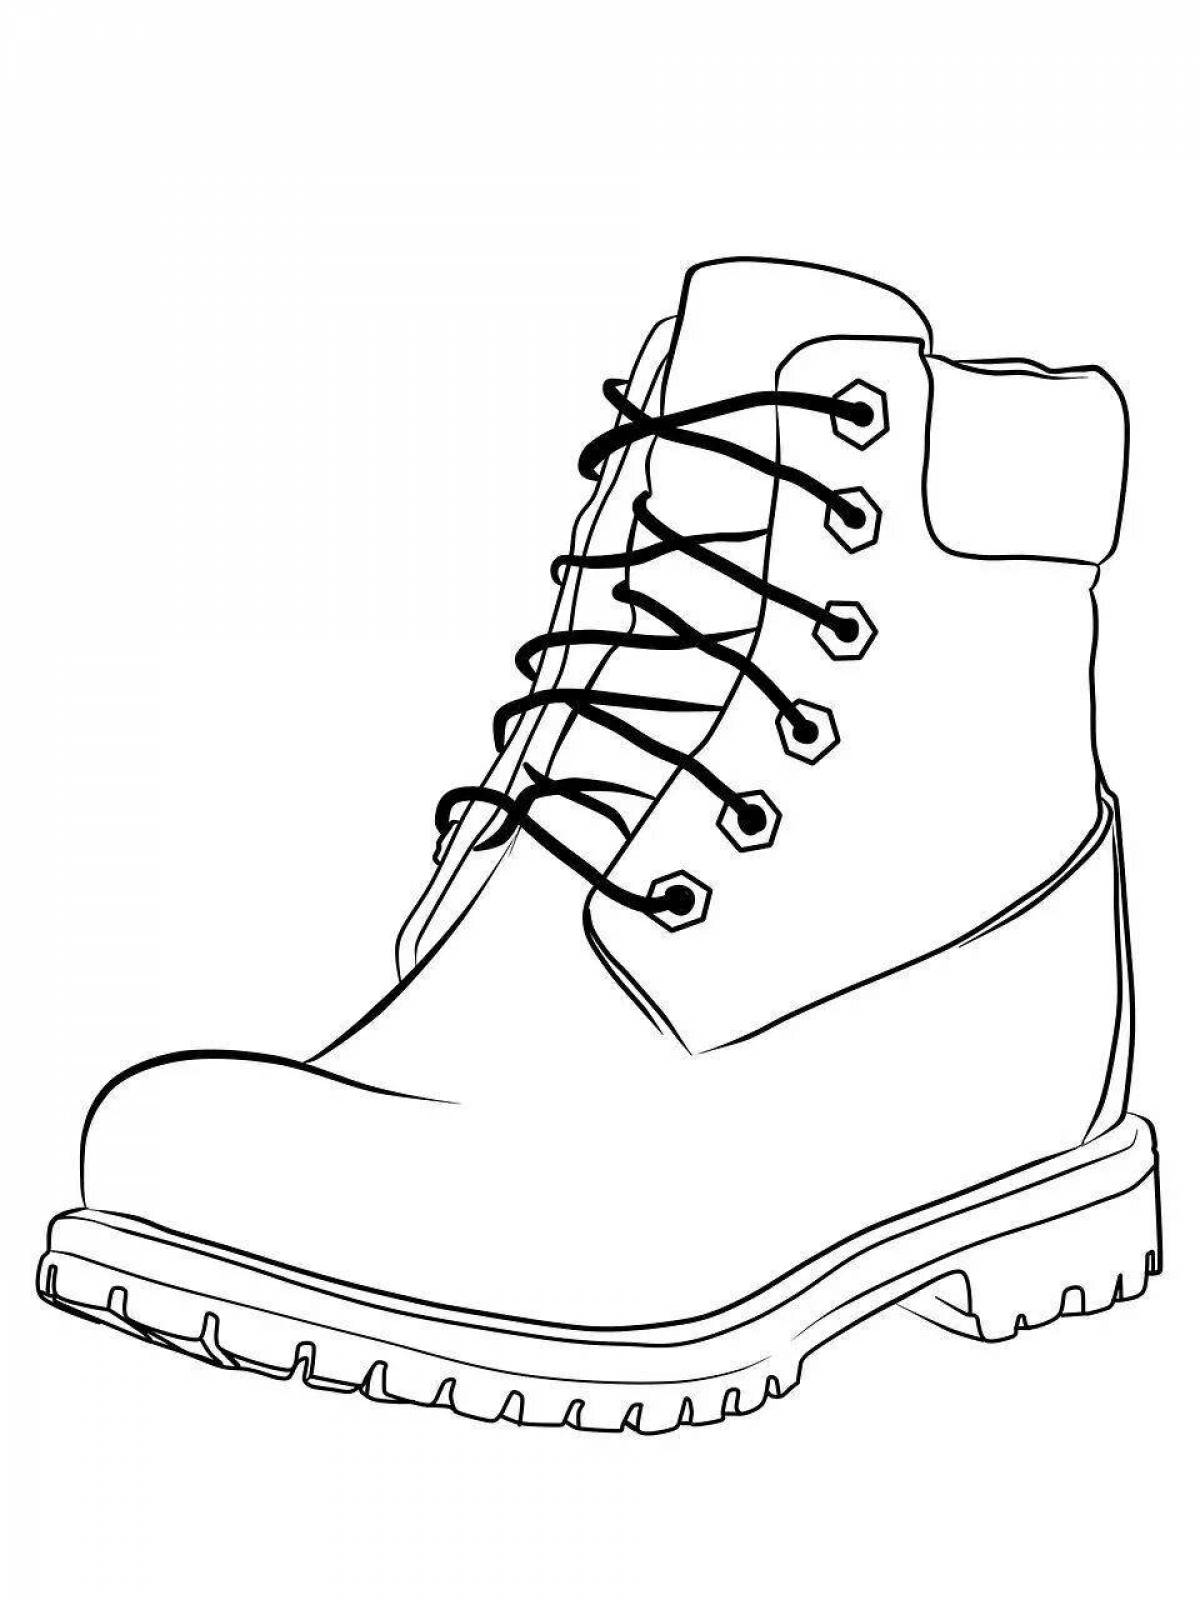 Fantastic winter shoes coloring book for children